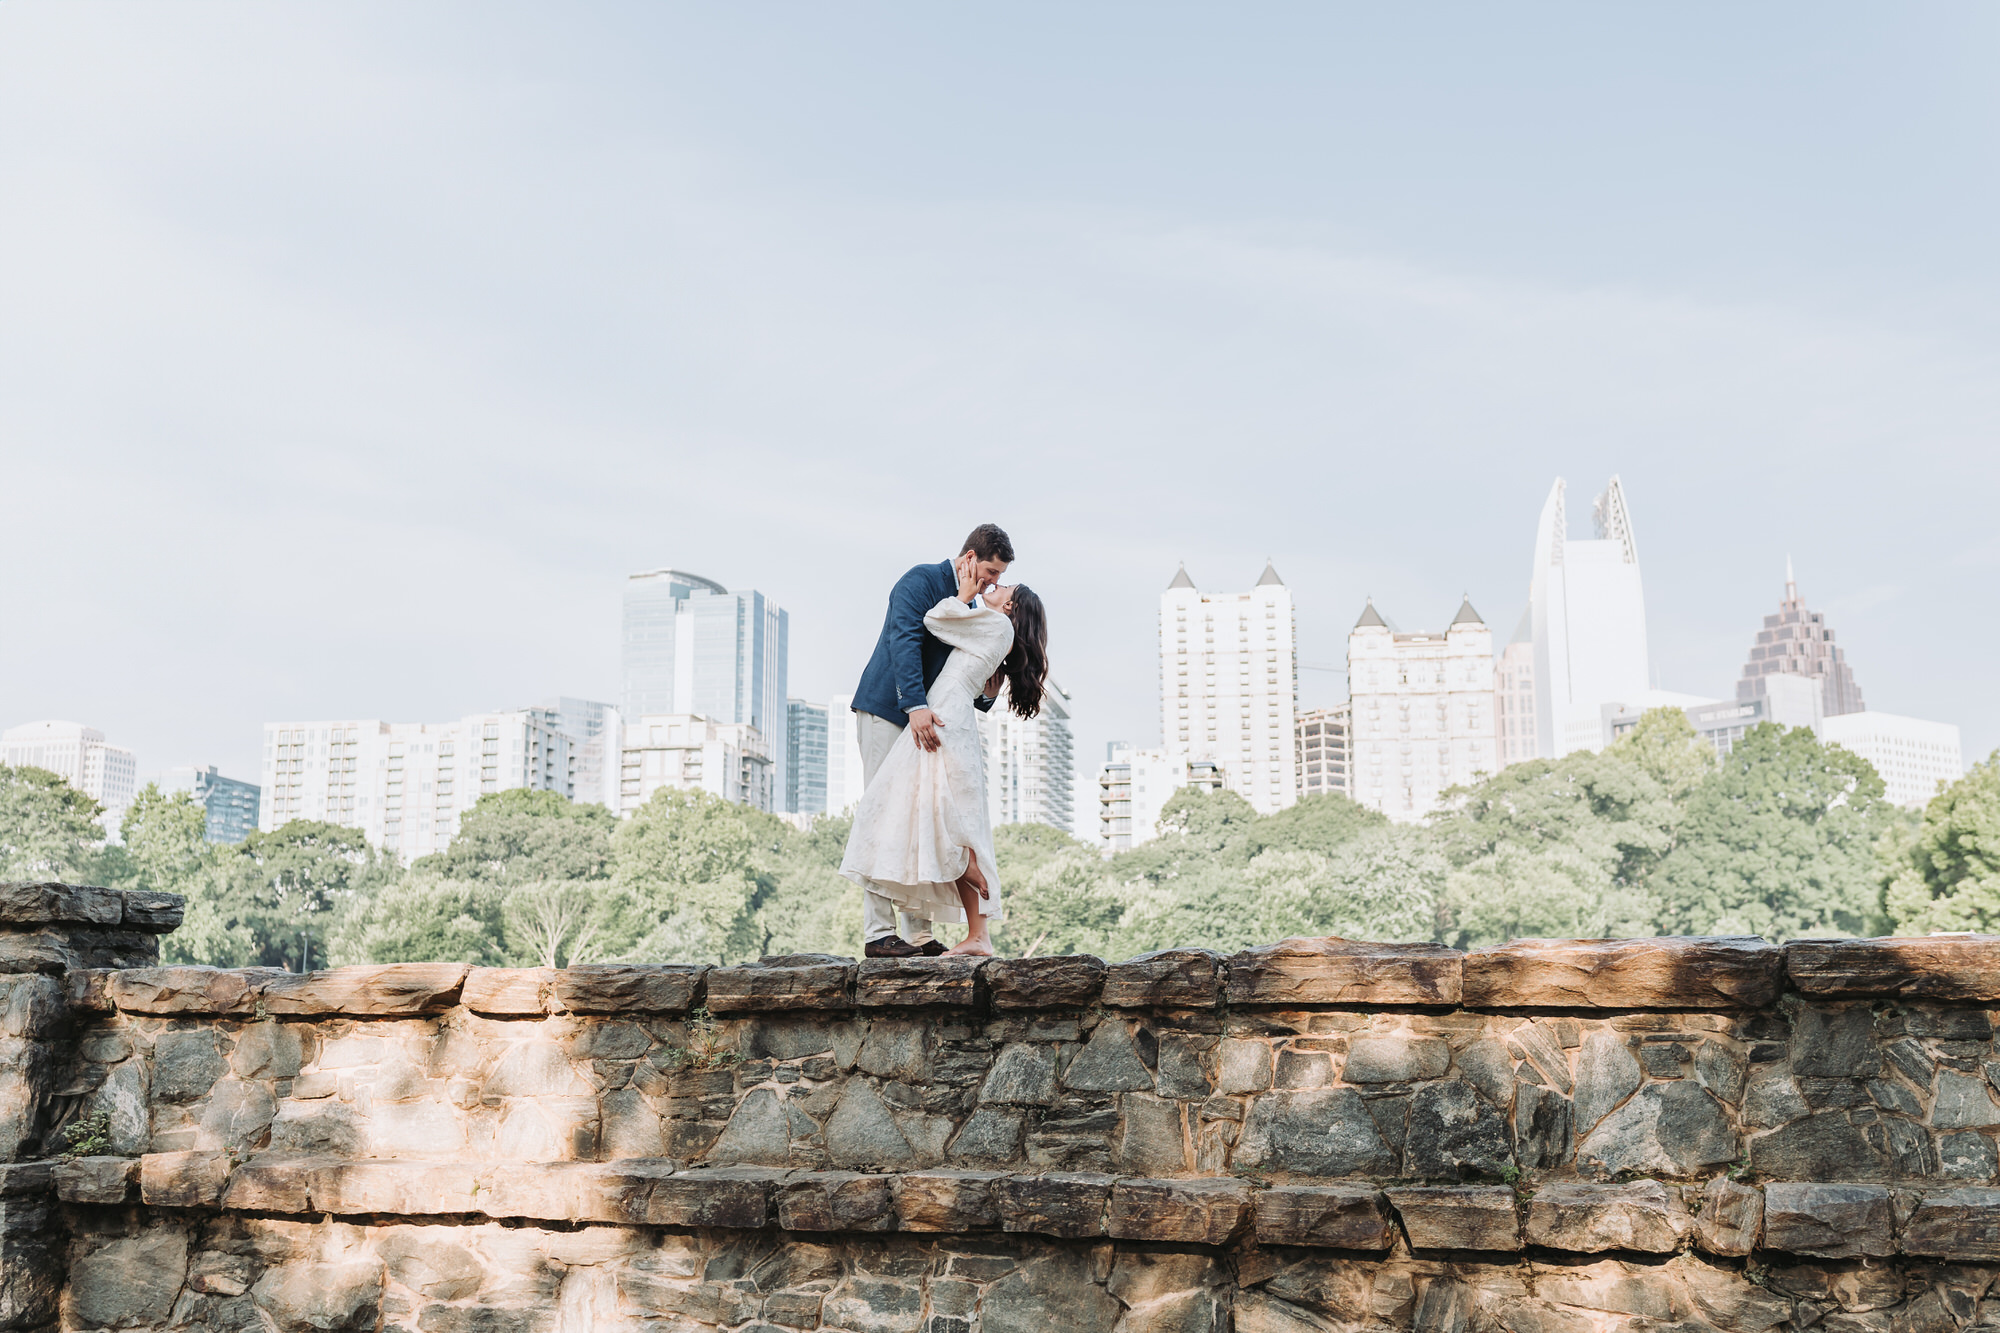 Engagement session at piedmont park. Engaged couple is kissing with the city view in the background.